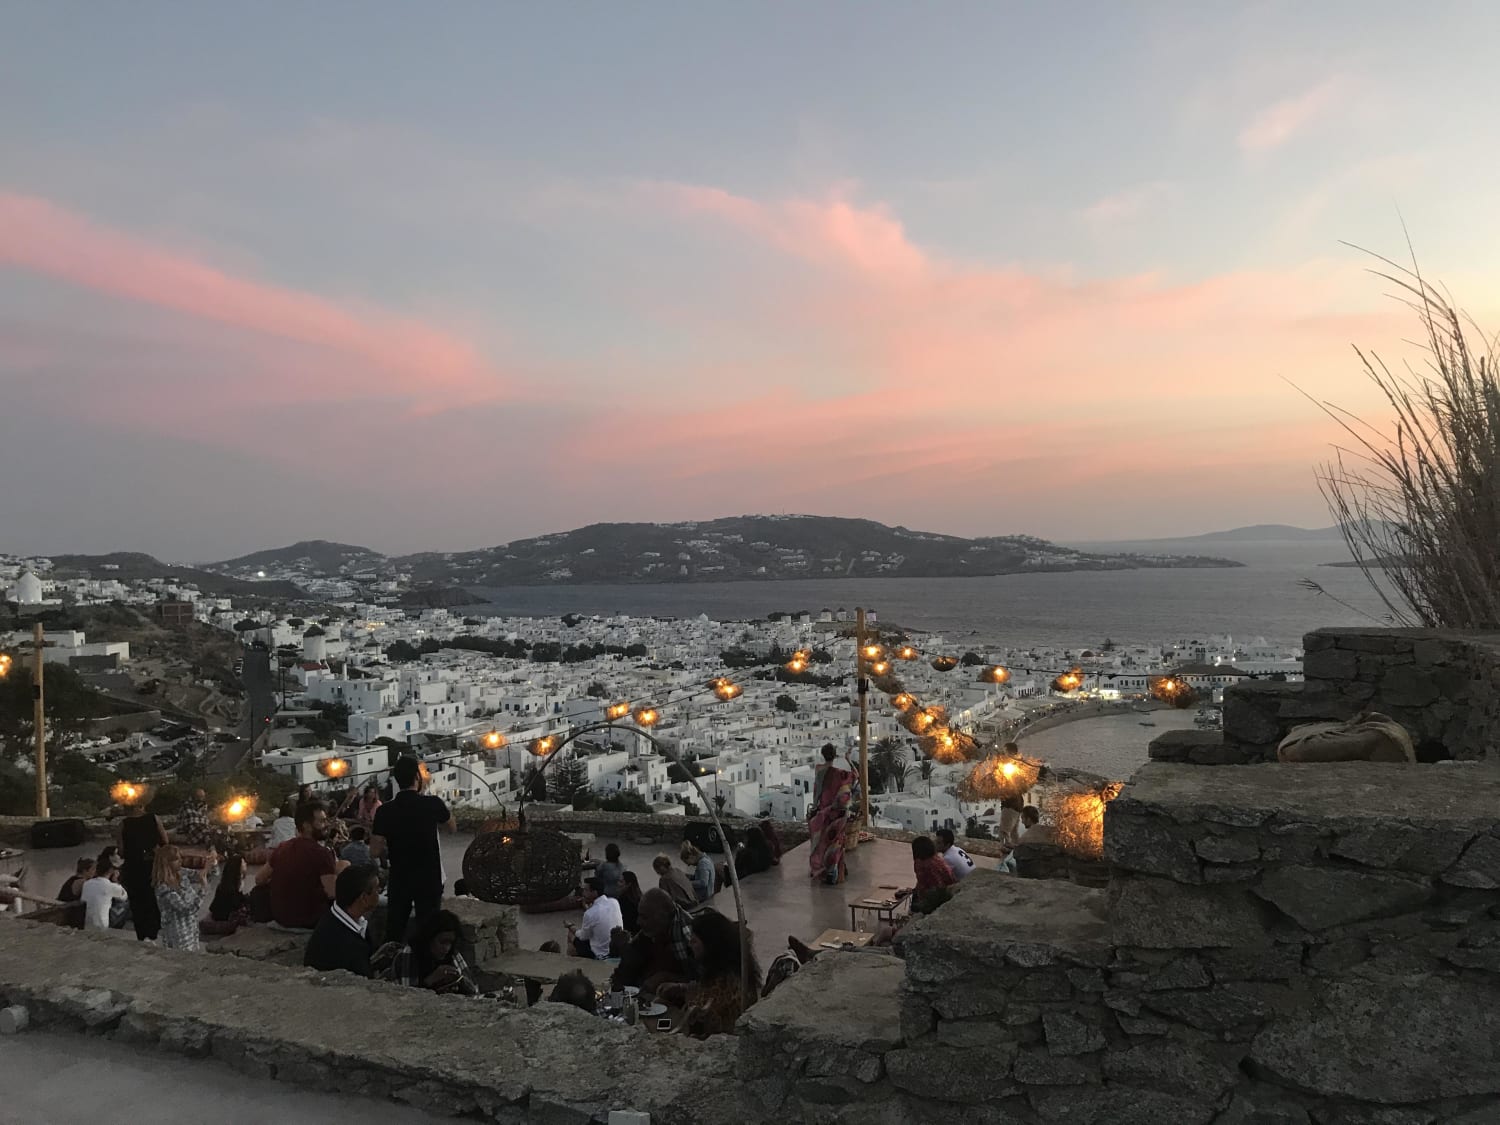 An unfiltered photo I took a few years back in Mykonos